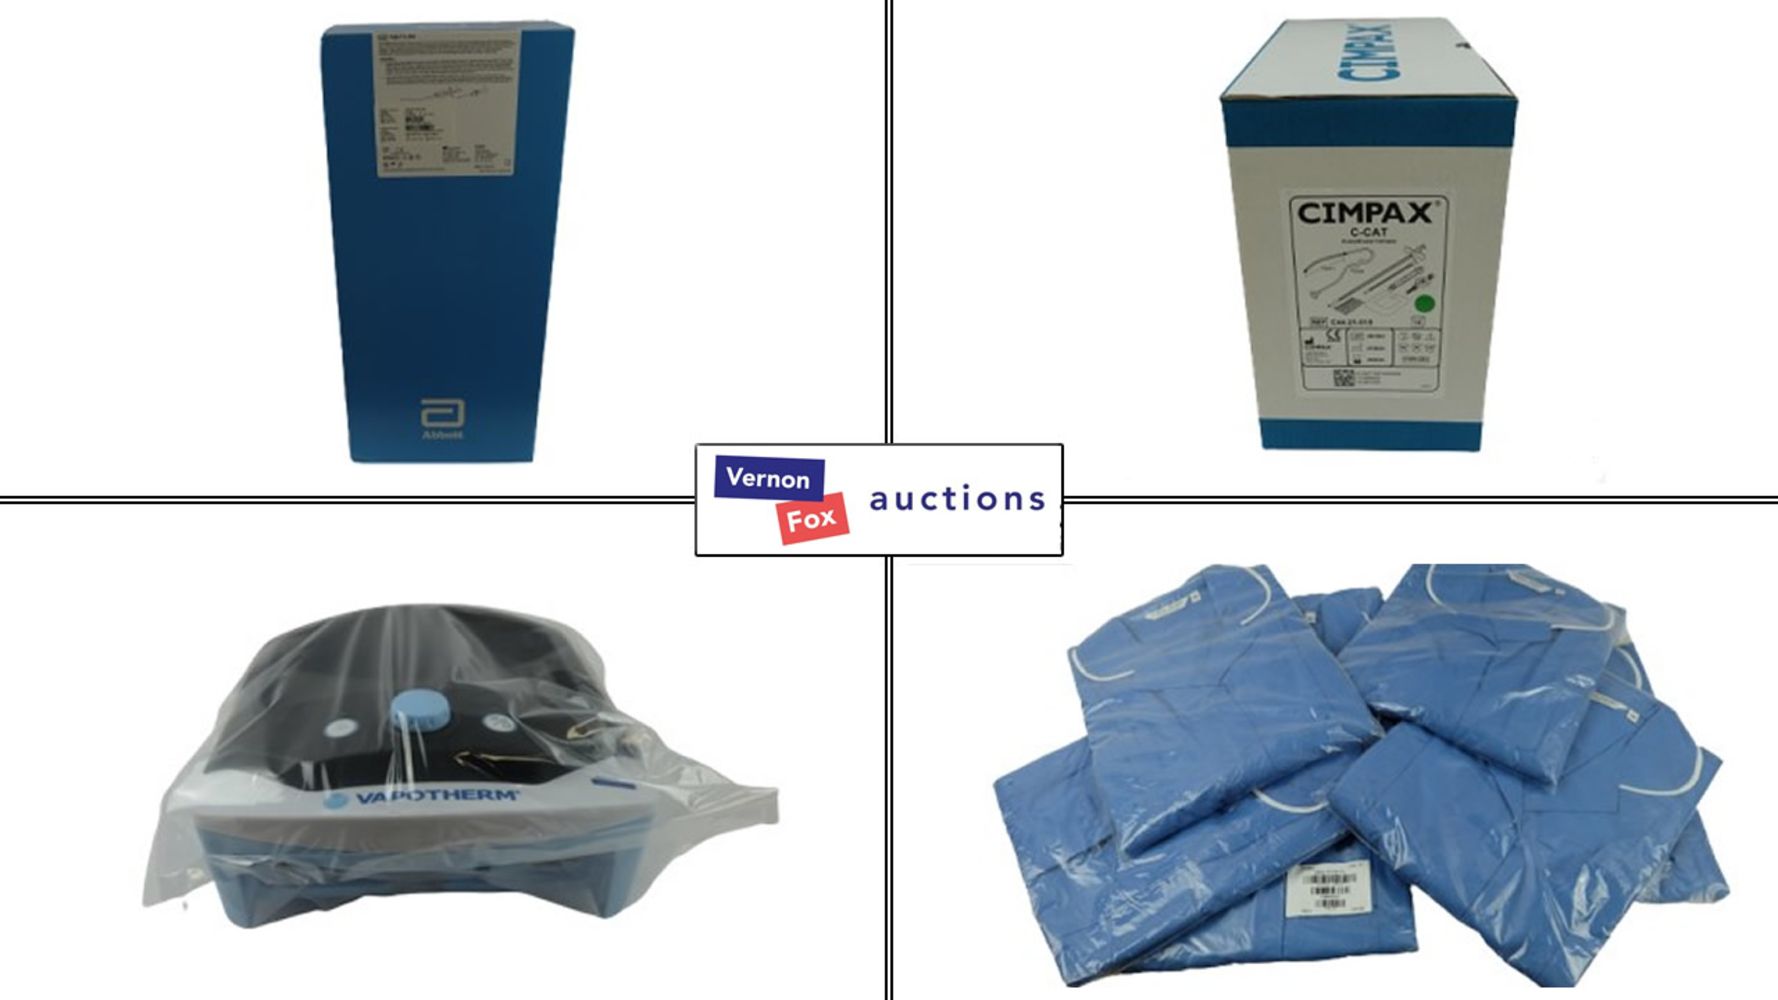 TIMED ONLINE AUCTION: A wide choice of Medical Equipment Items. FREE UK DELIVERY!